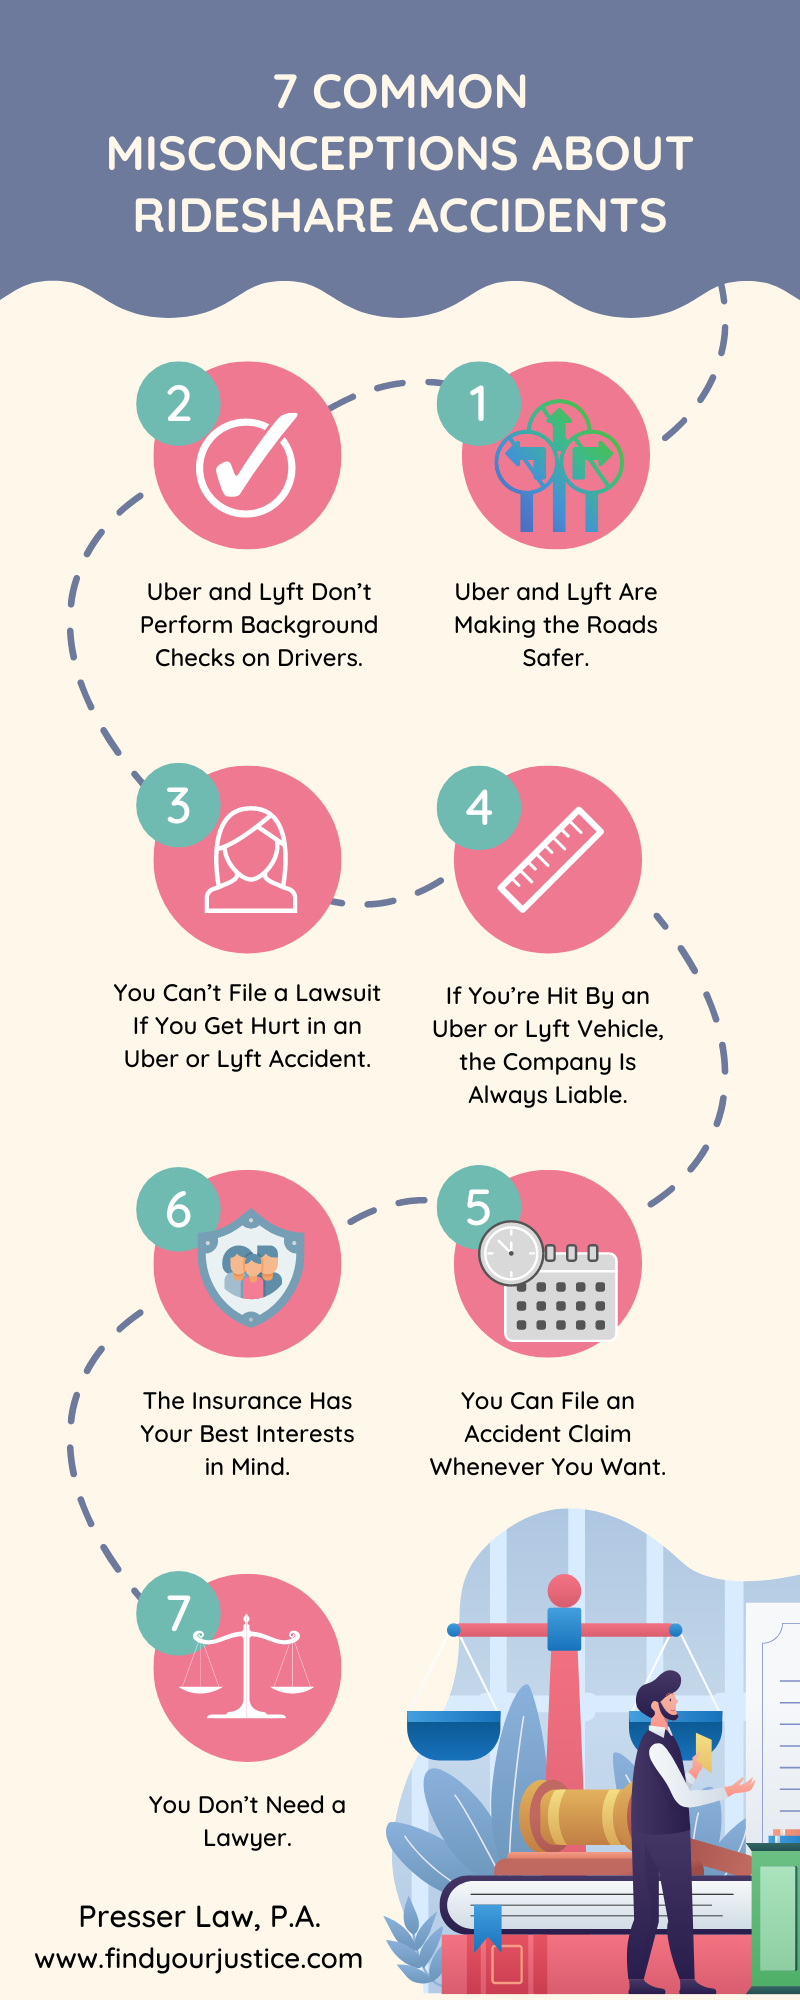 Common Misconceptions About Rideshare Accidents Infographic